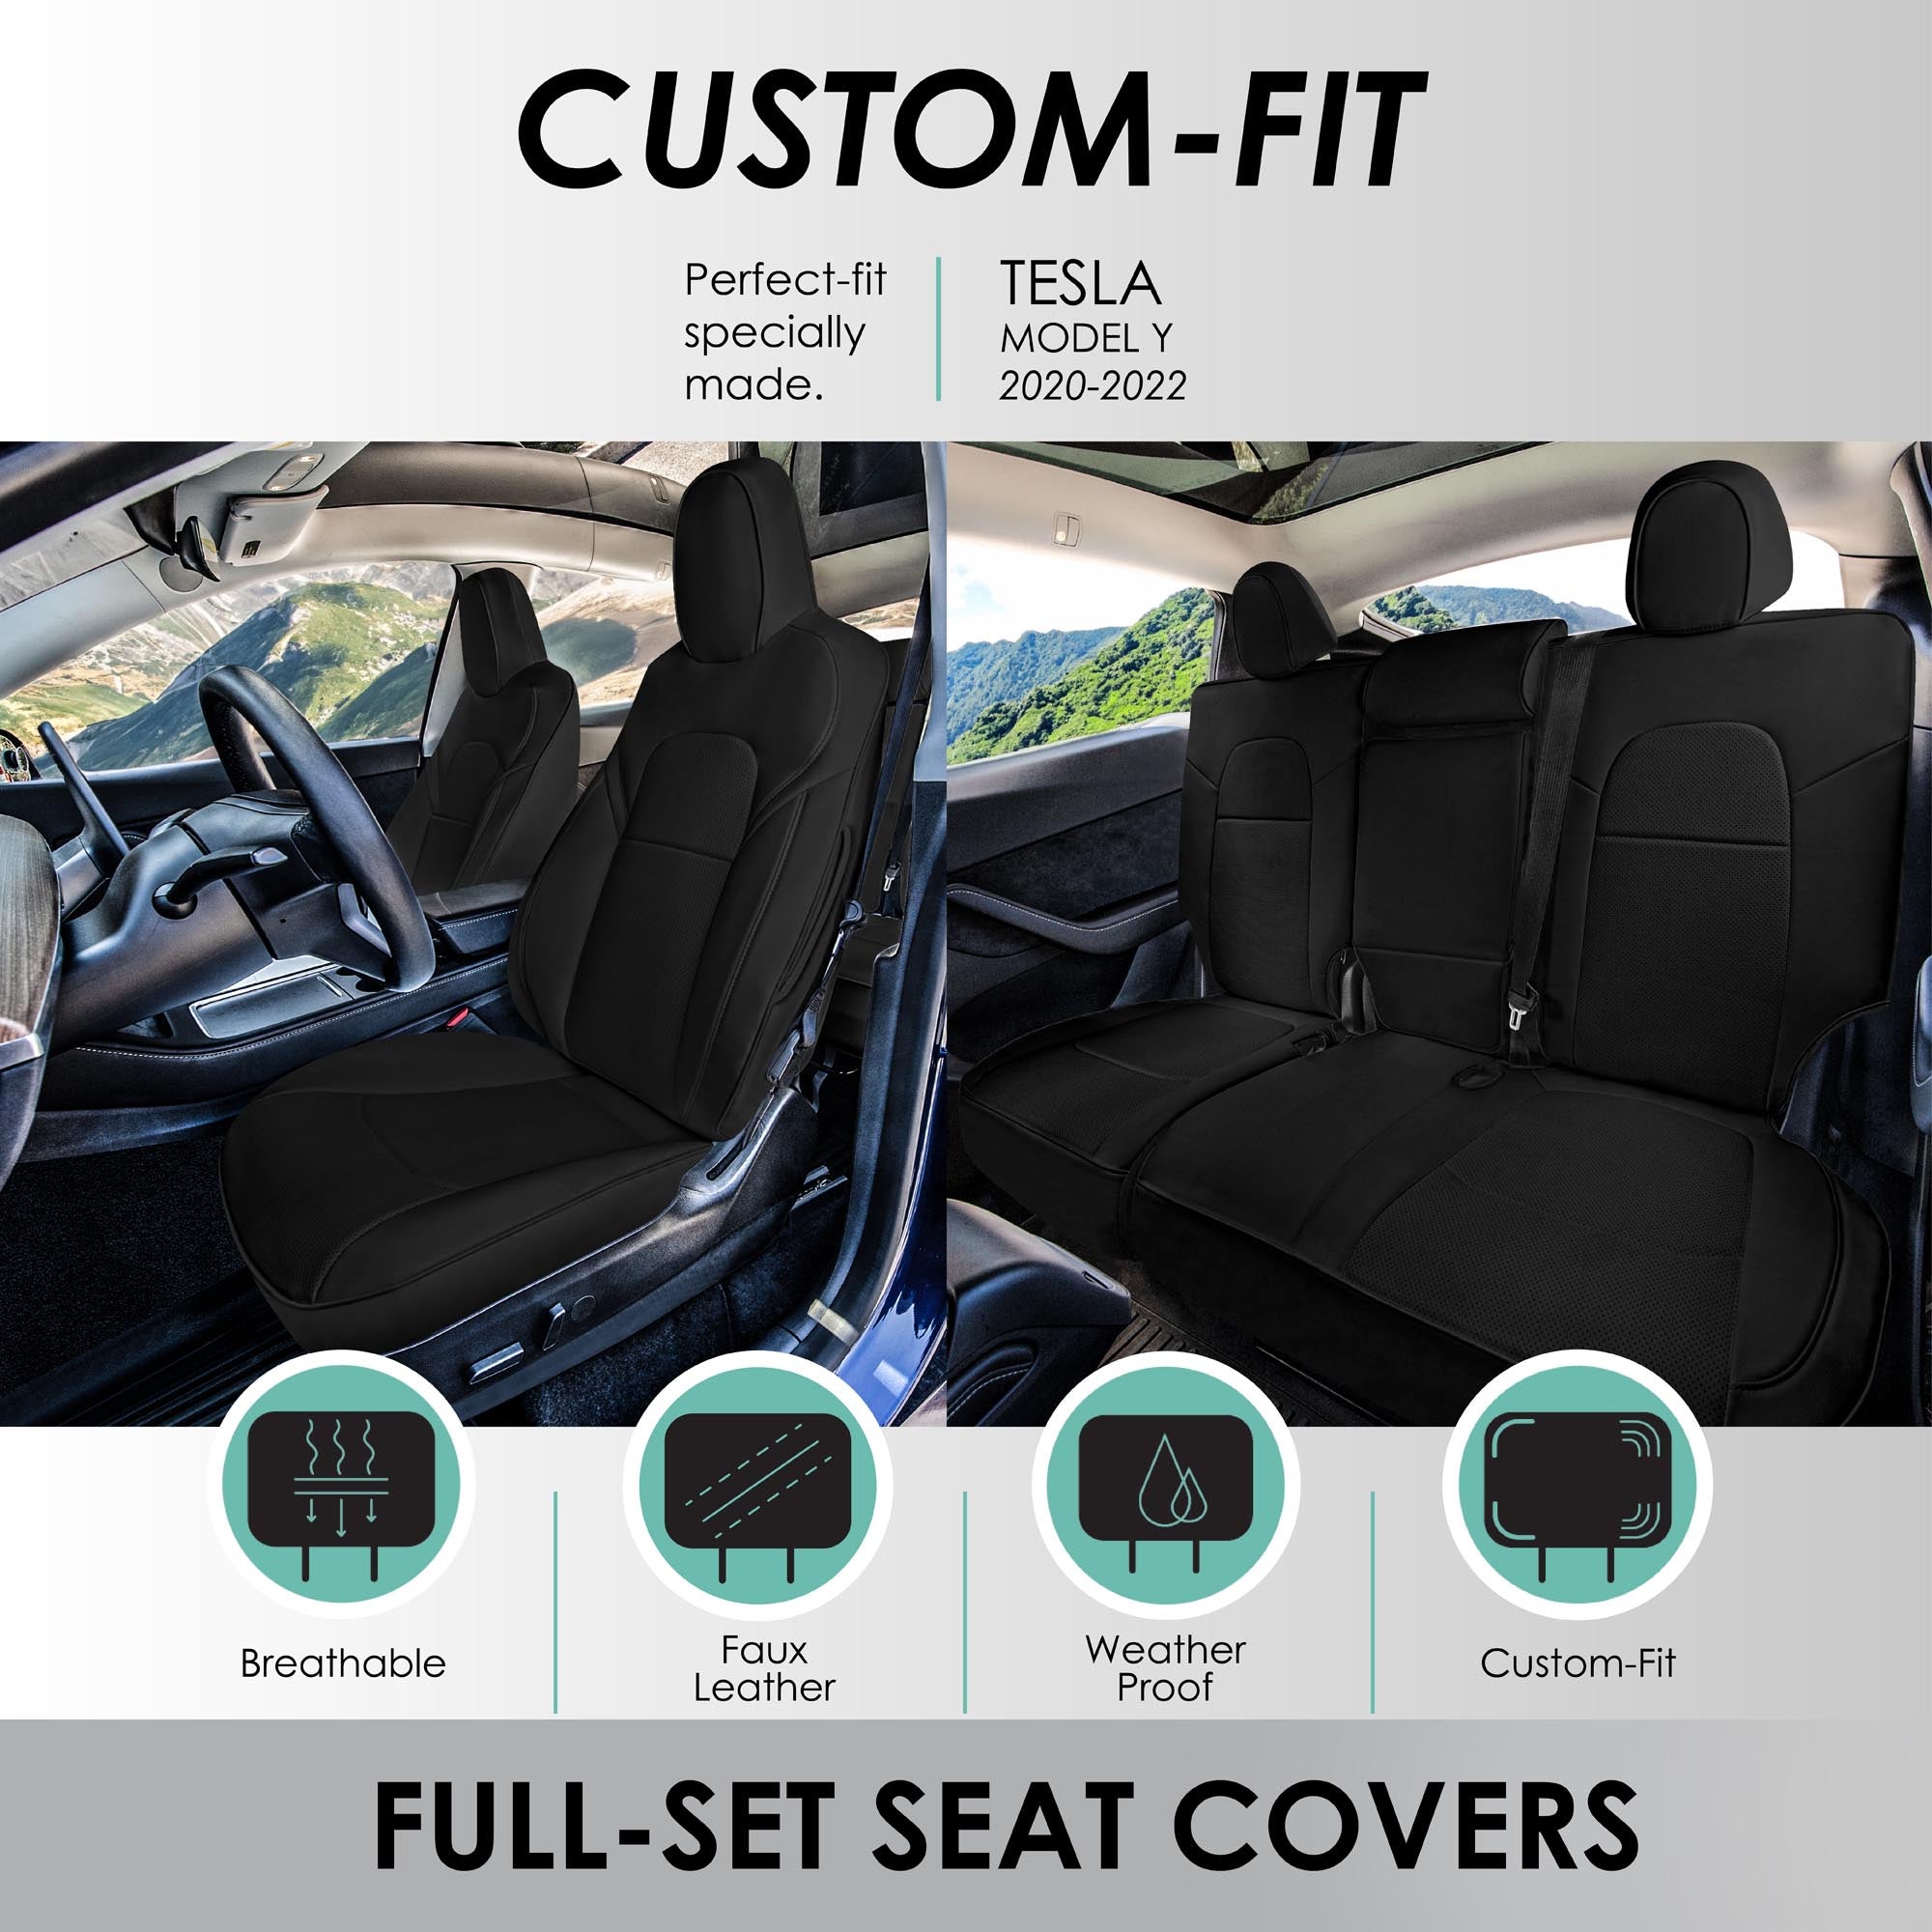 Tesla Model Y 2020 - 2024 - Full Set Seat Covers - Black Faux Leather